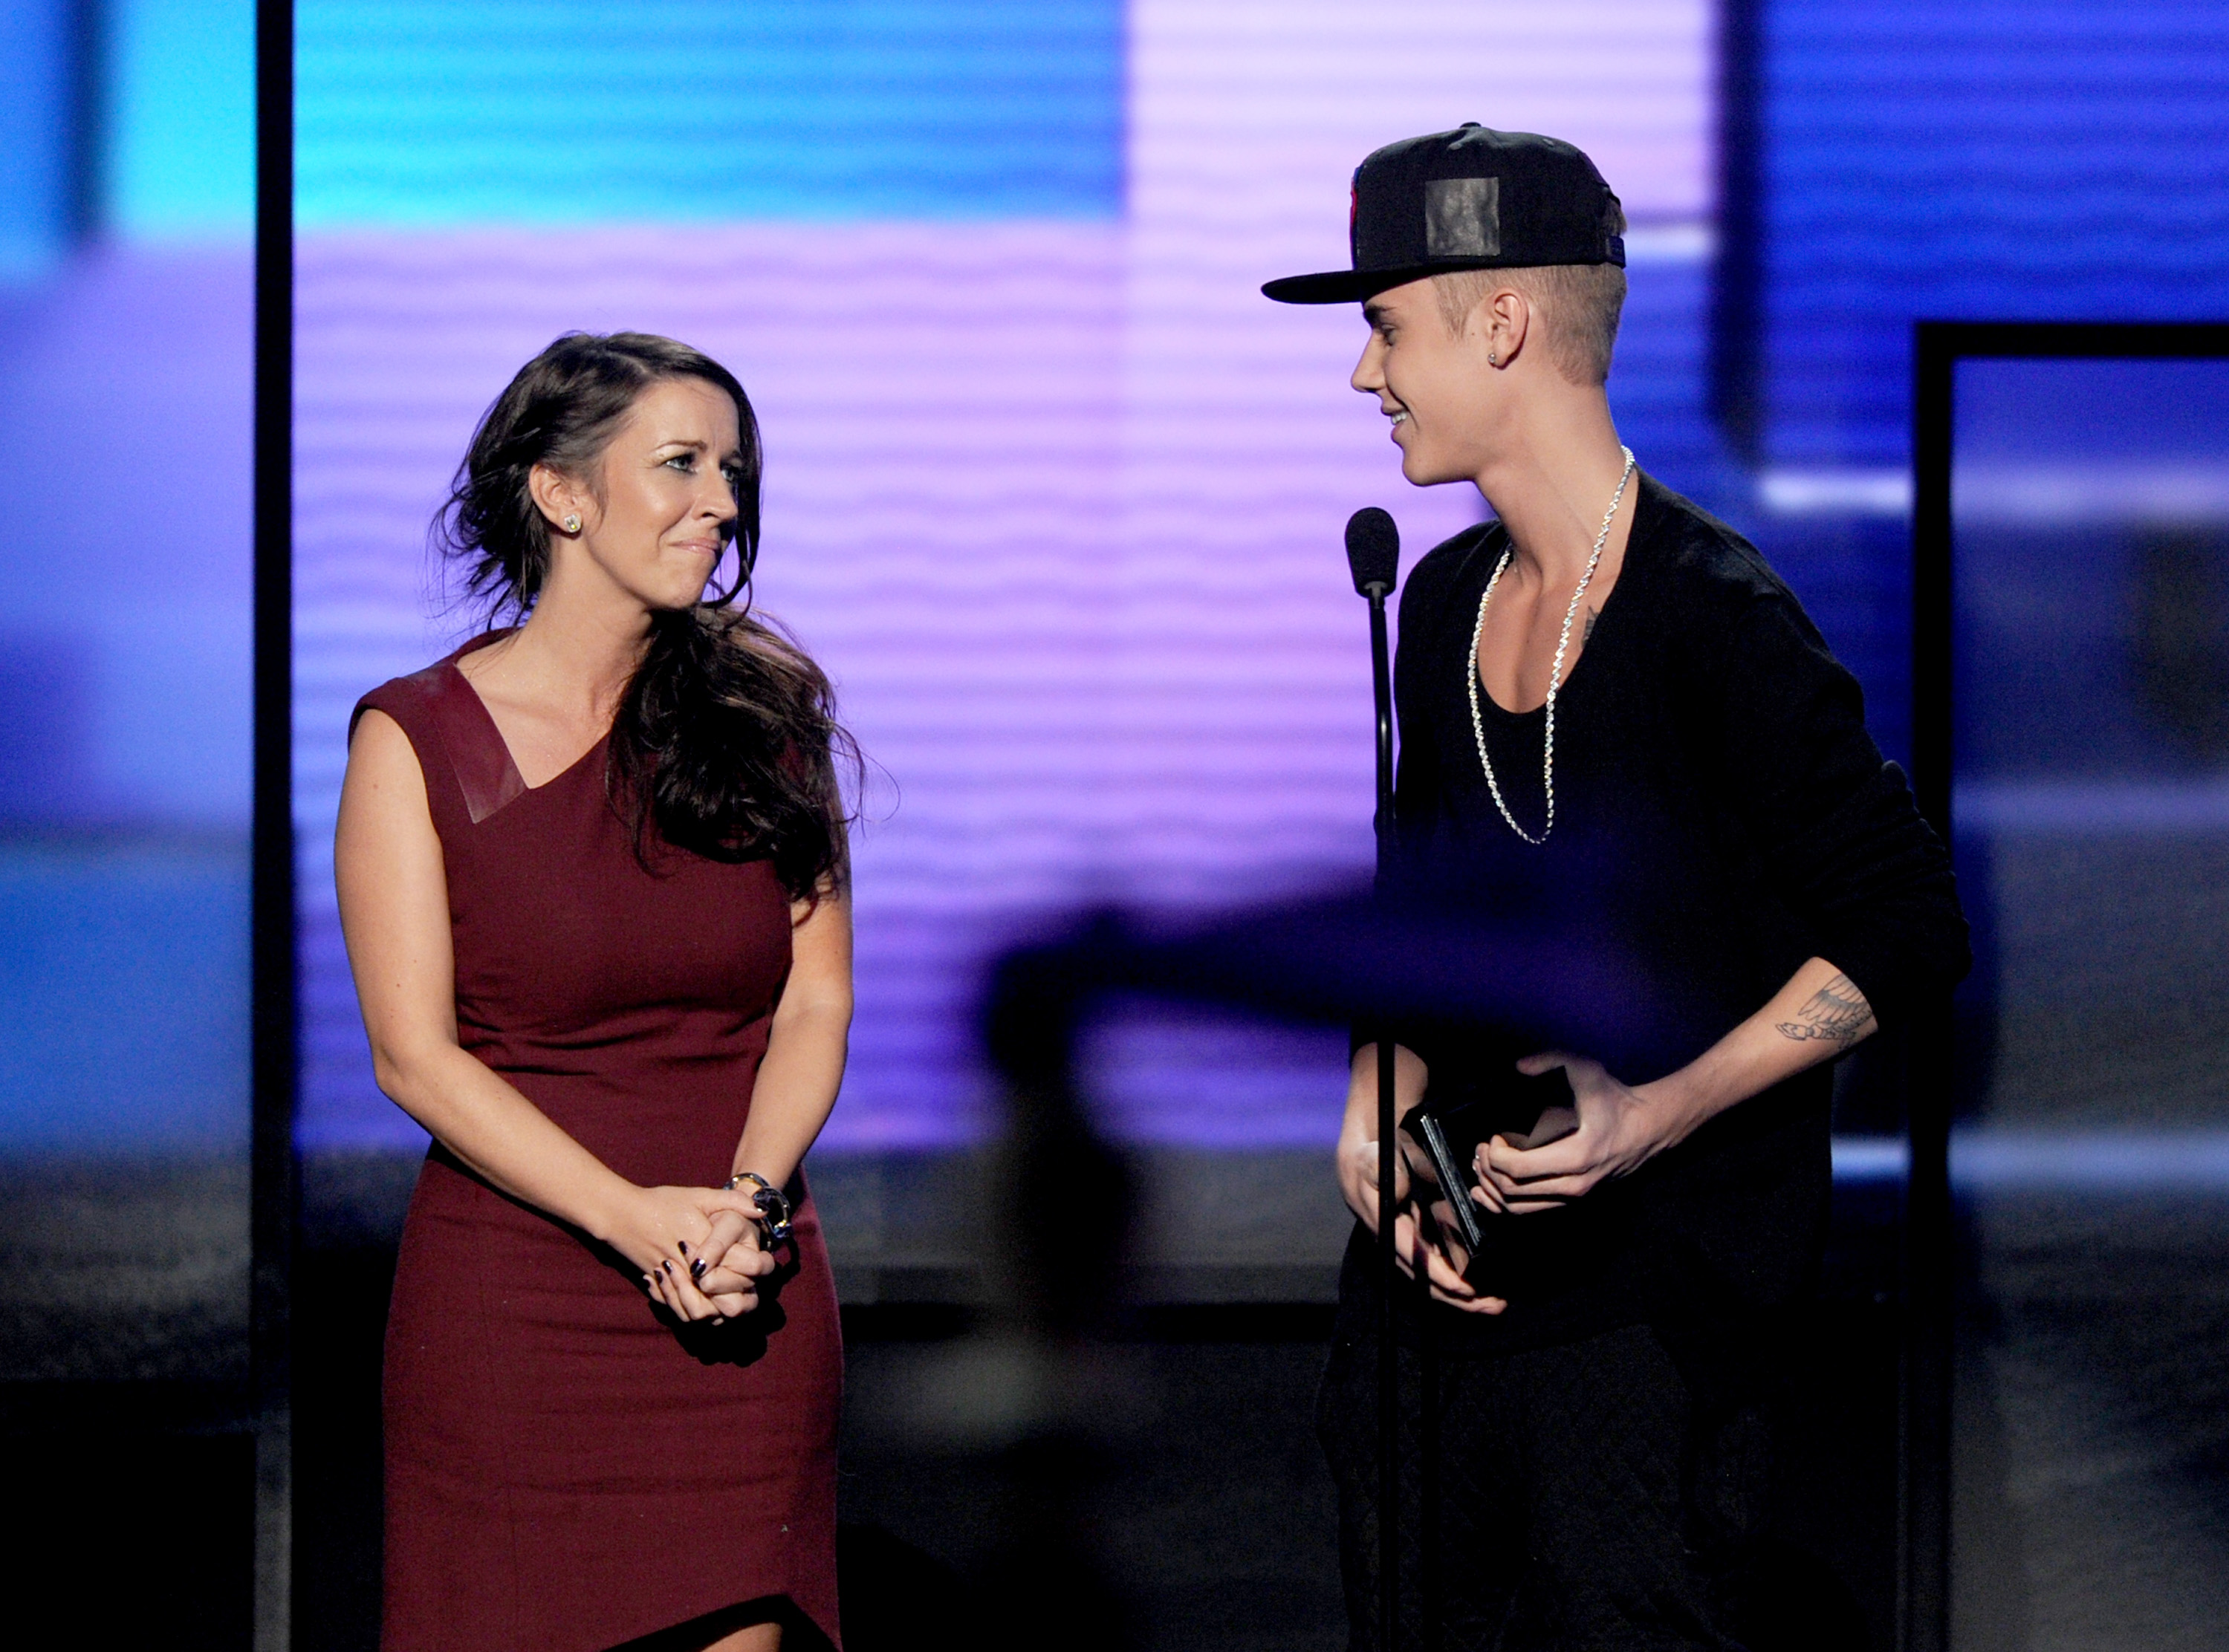 Justin Bieber with Pattie Malette as he accepts the award for Artist of the Year onstage during the 40th American Music Awards in Los Angeles, California, on November 18, 2012. | Source: Getty Images